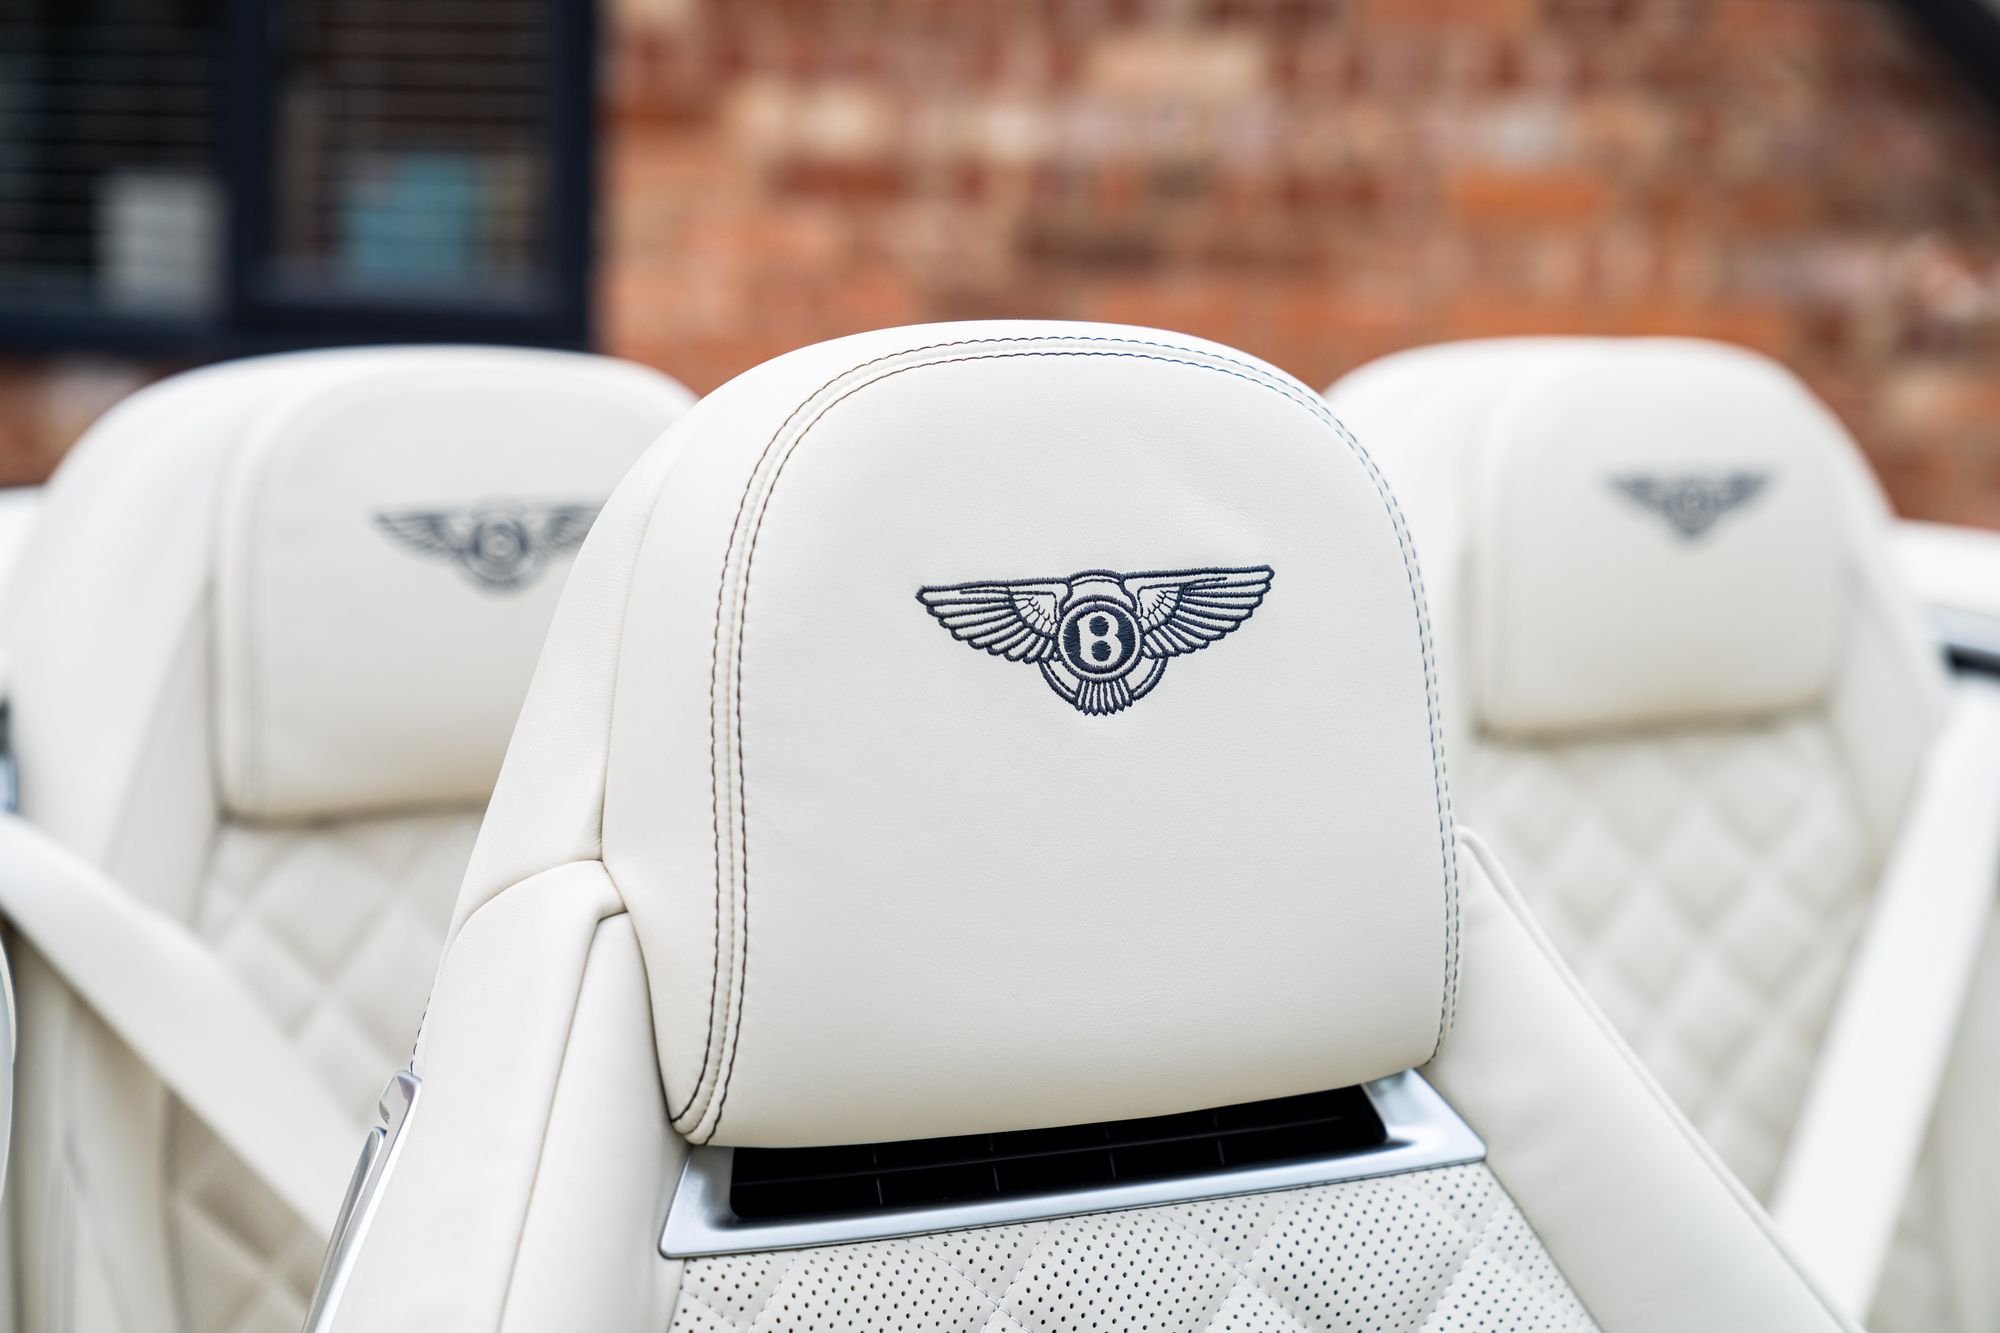 2015 Bentley Continental GTC V8S for sale